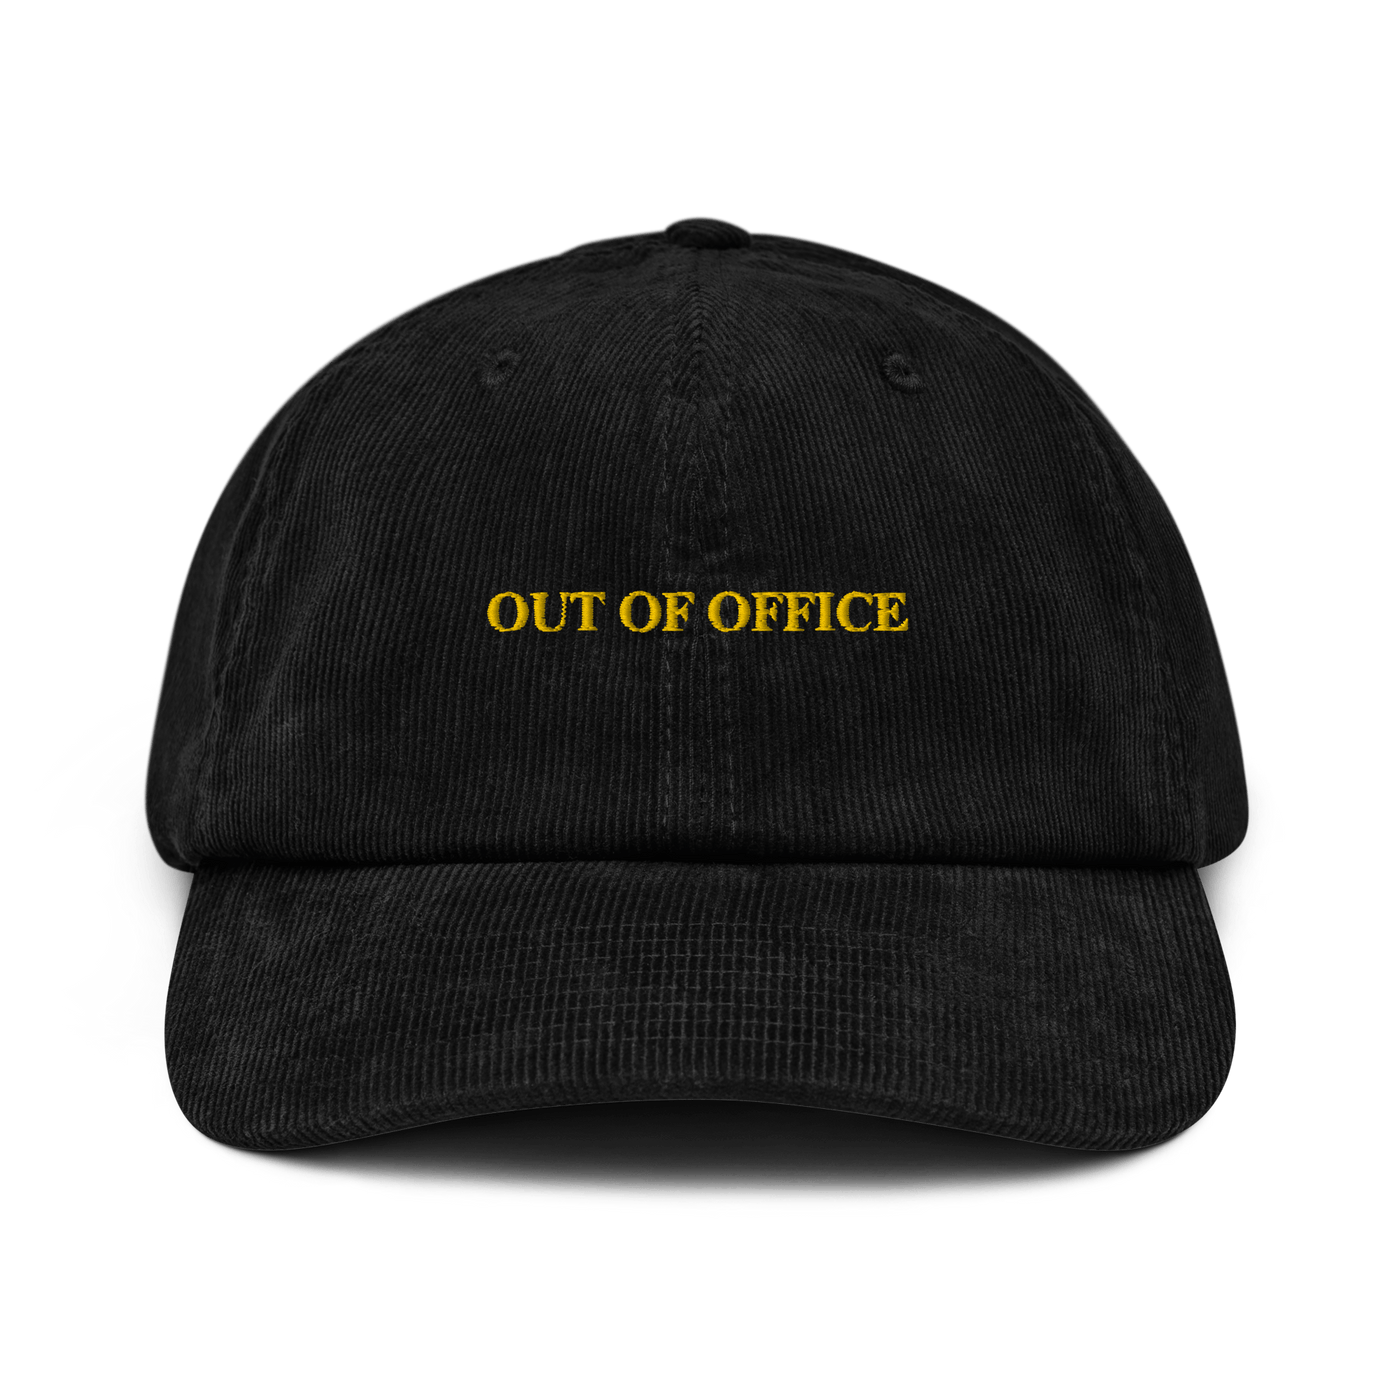 OUT OF OFFICE Corduroy hat - Black - - Just Another Cap Store